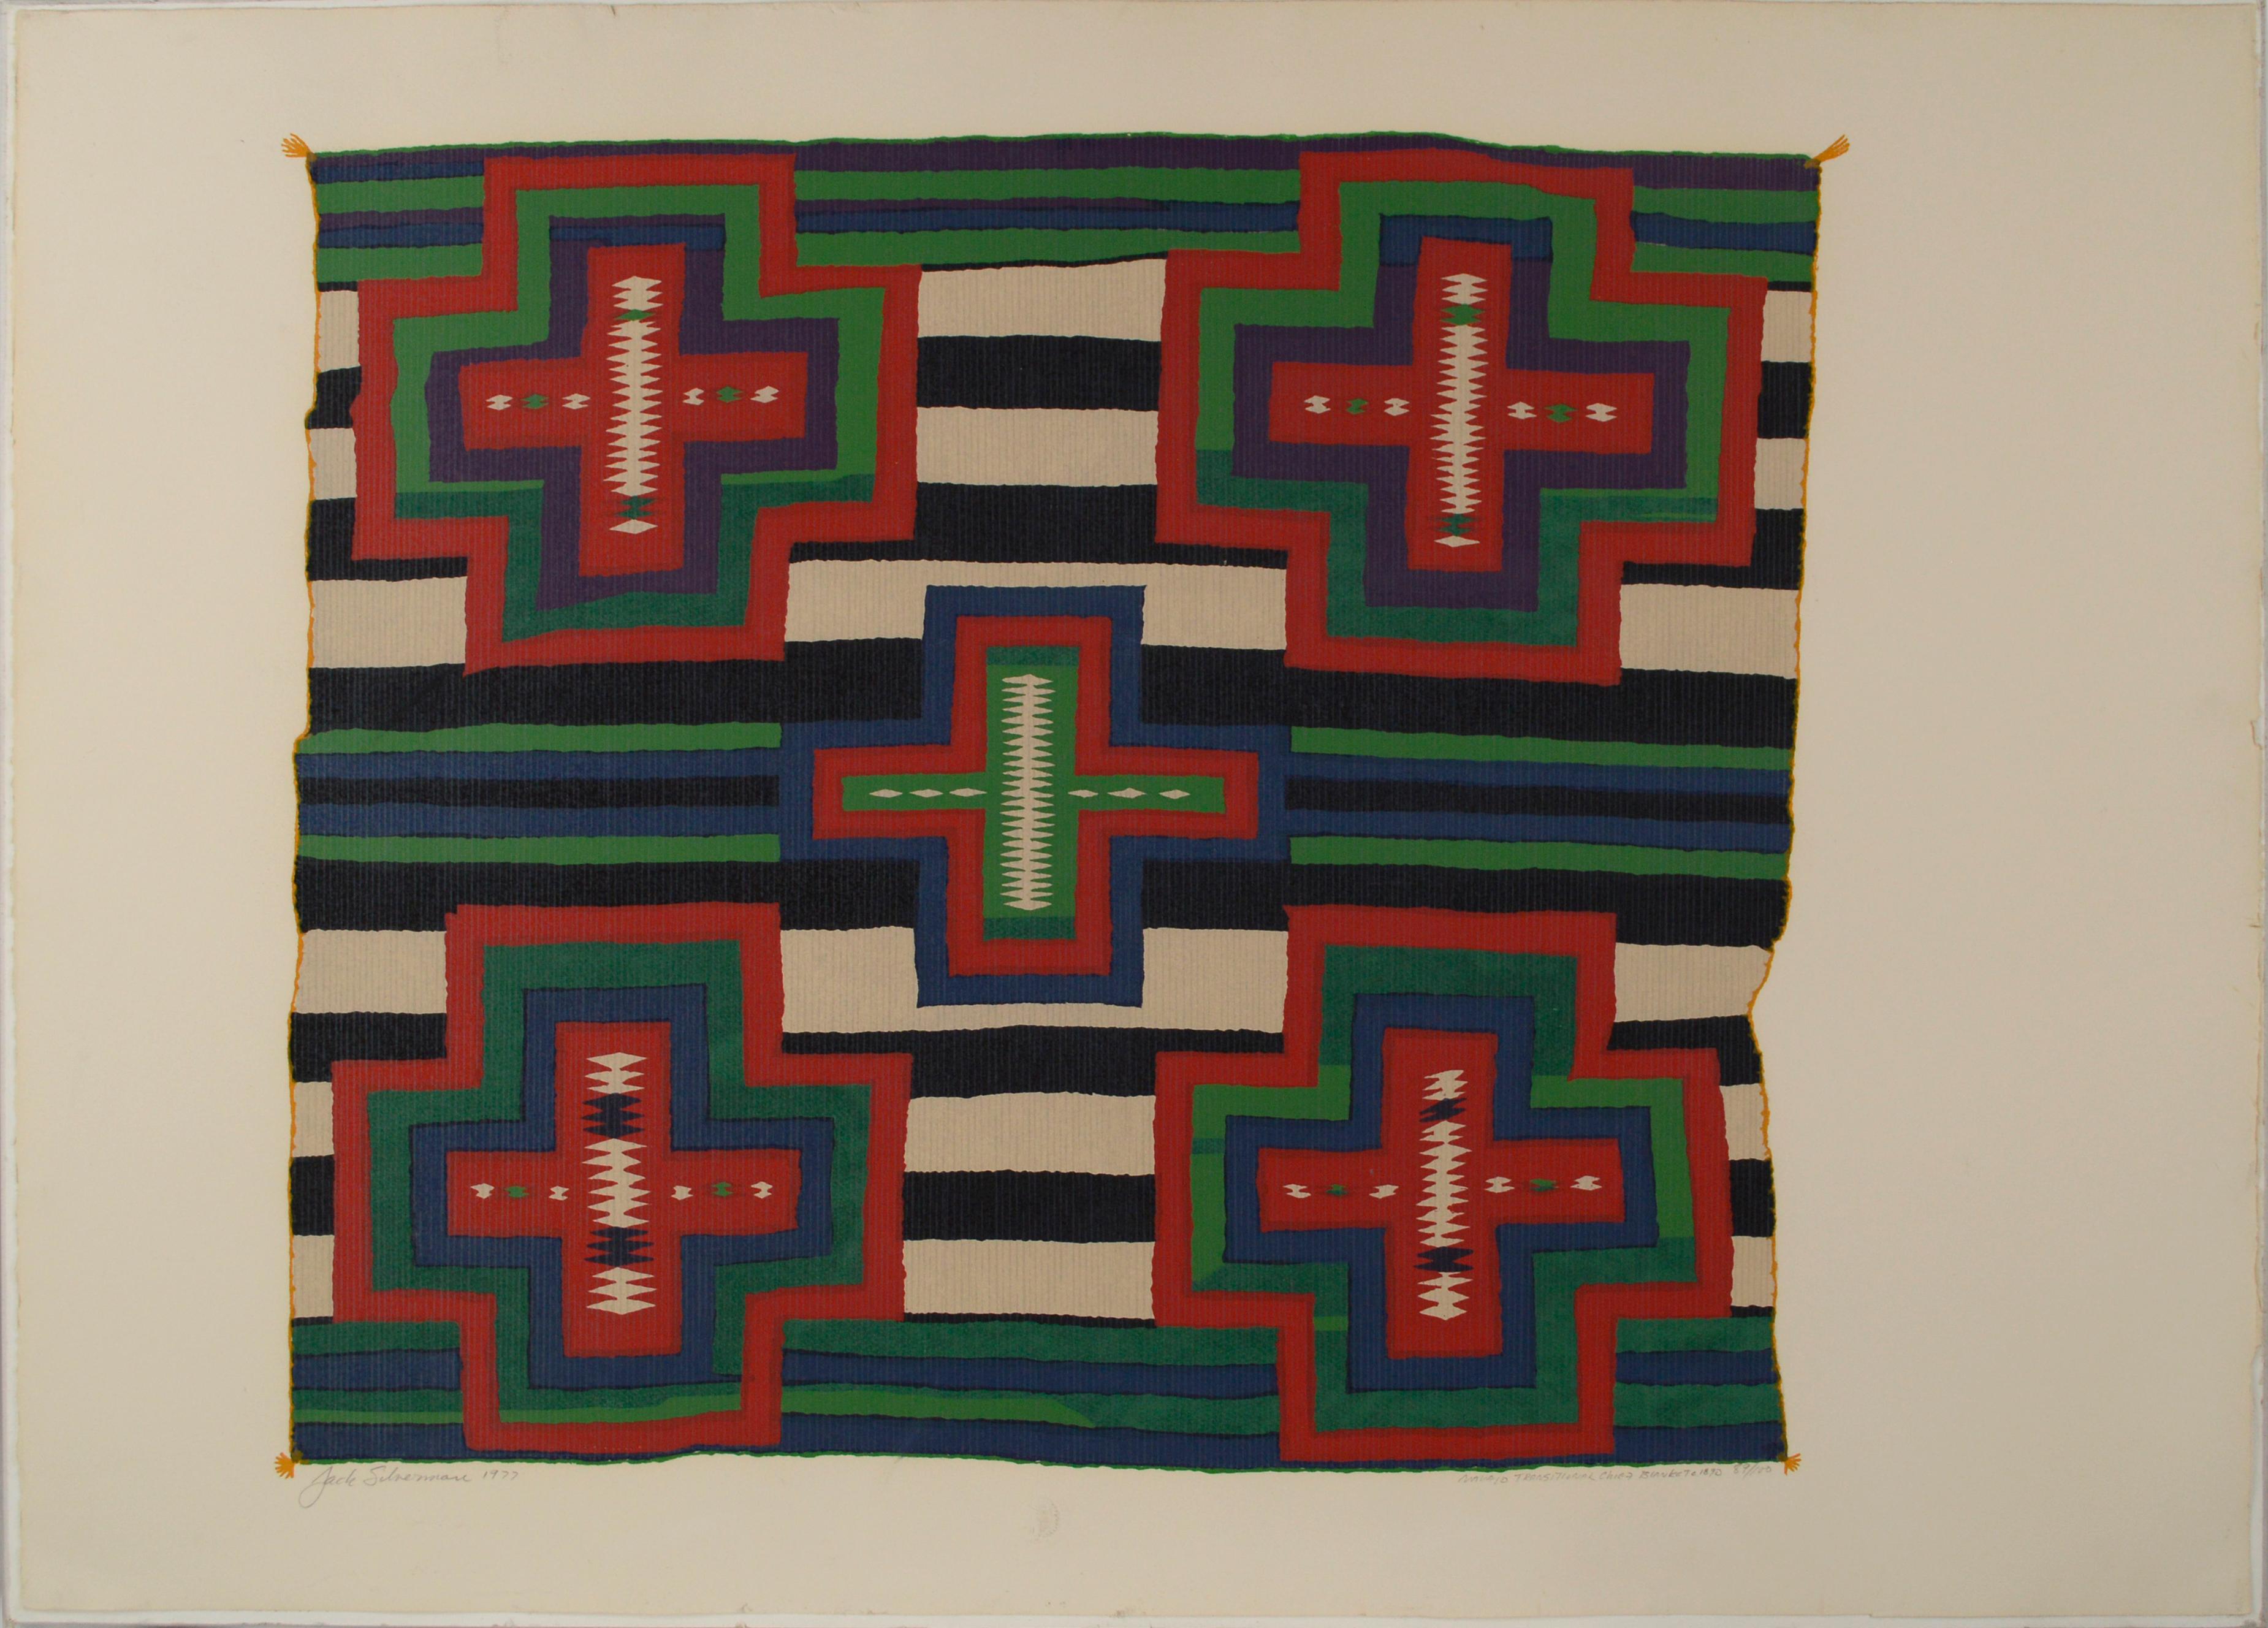  „NAVAJO LATE CLASSIC CHIEF BLANKET C.1900“ JACK SILVERMAN SIGNED SERIGRAPH 1977